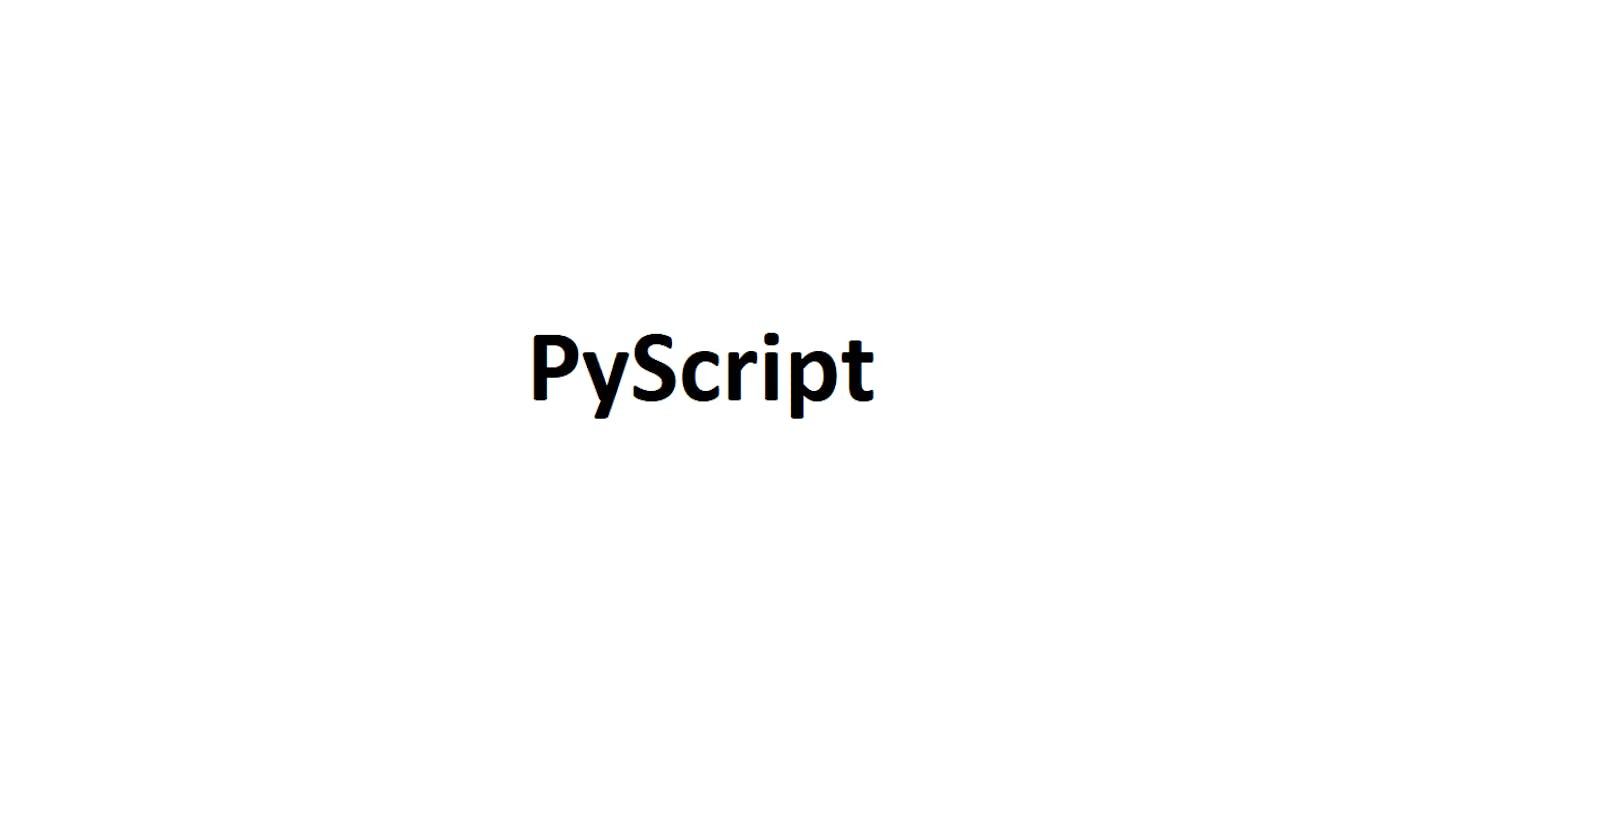 How to Start Using PyScript